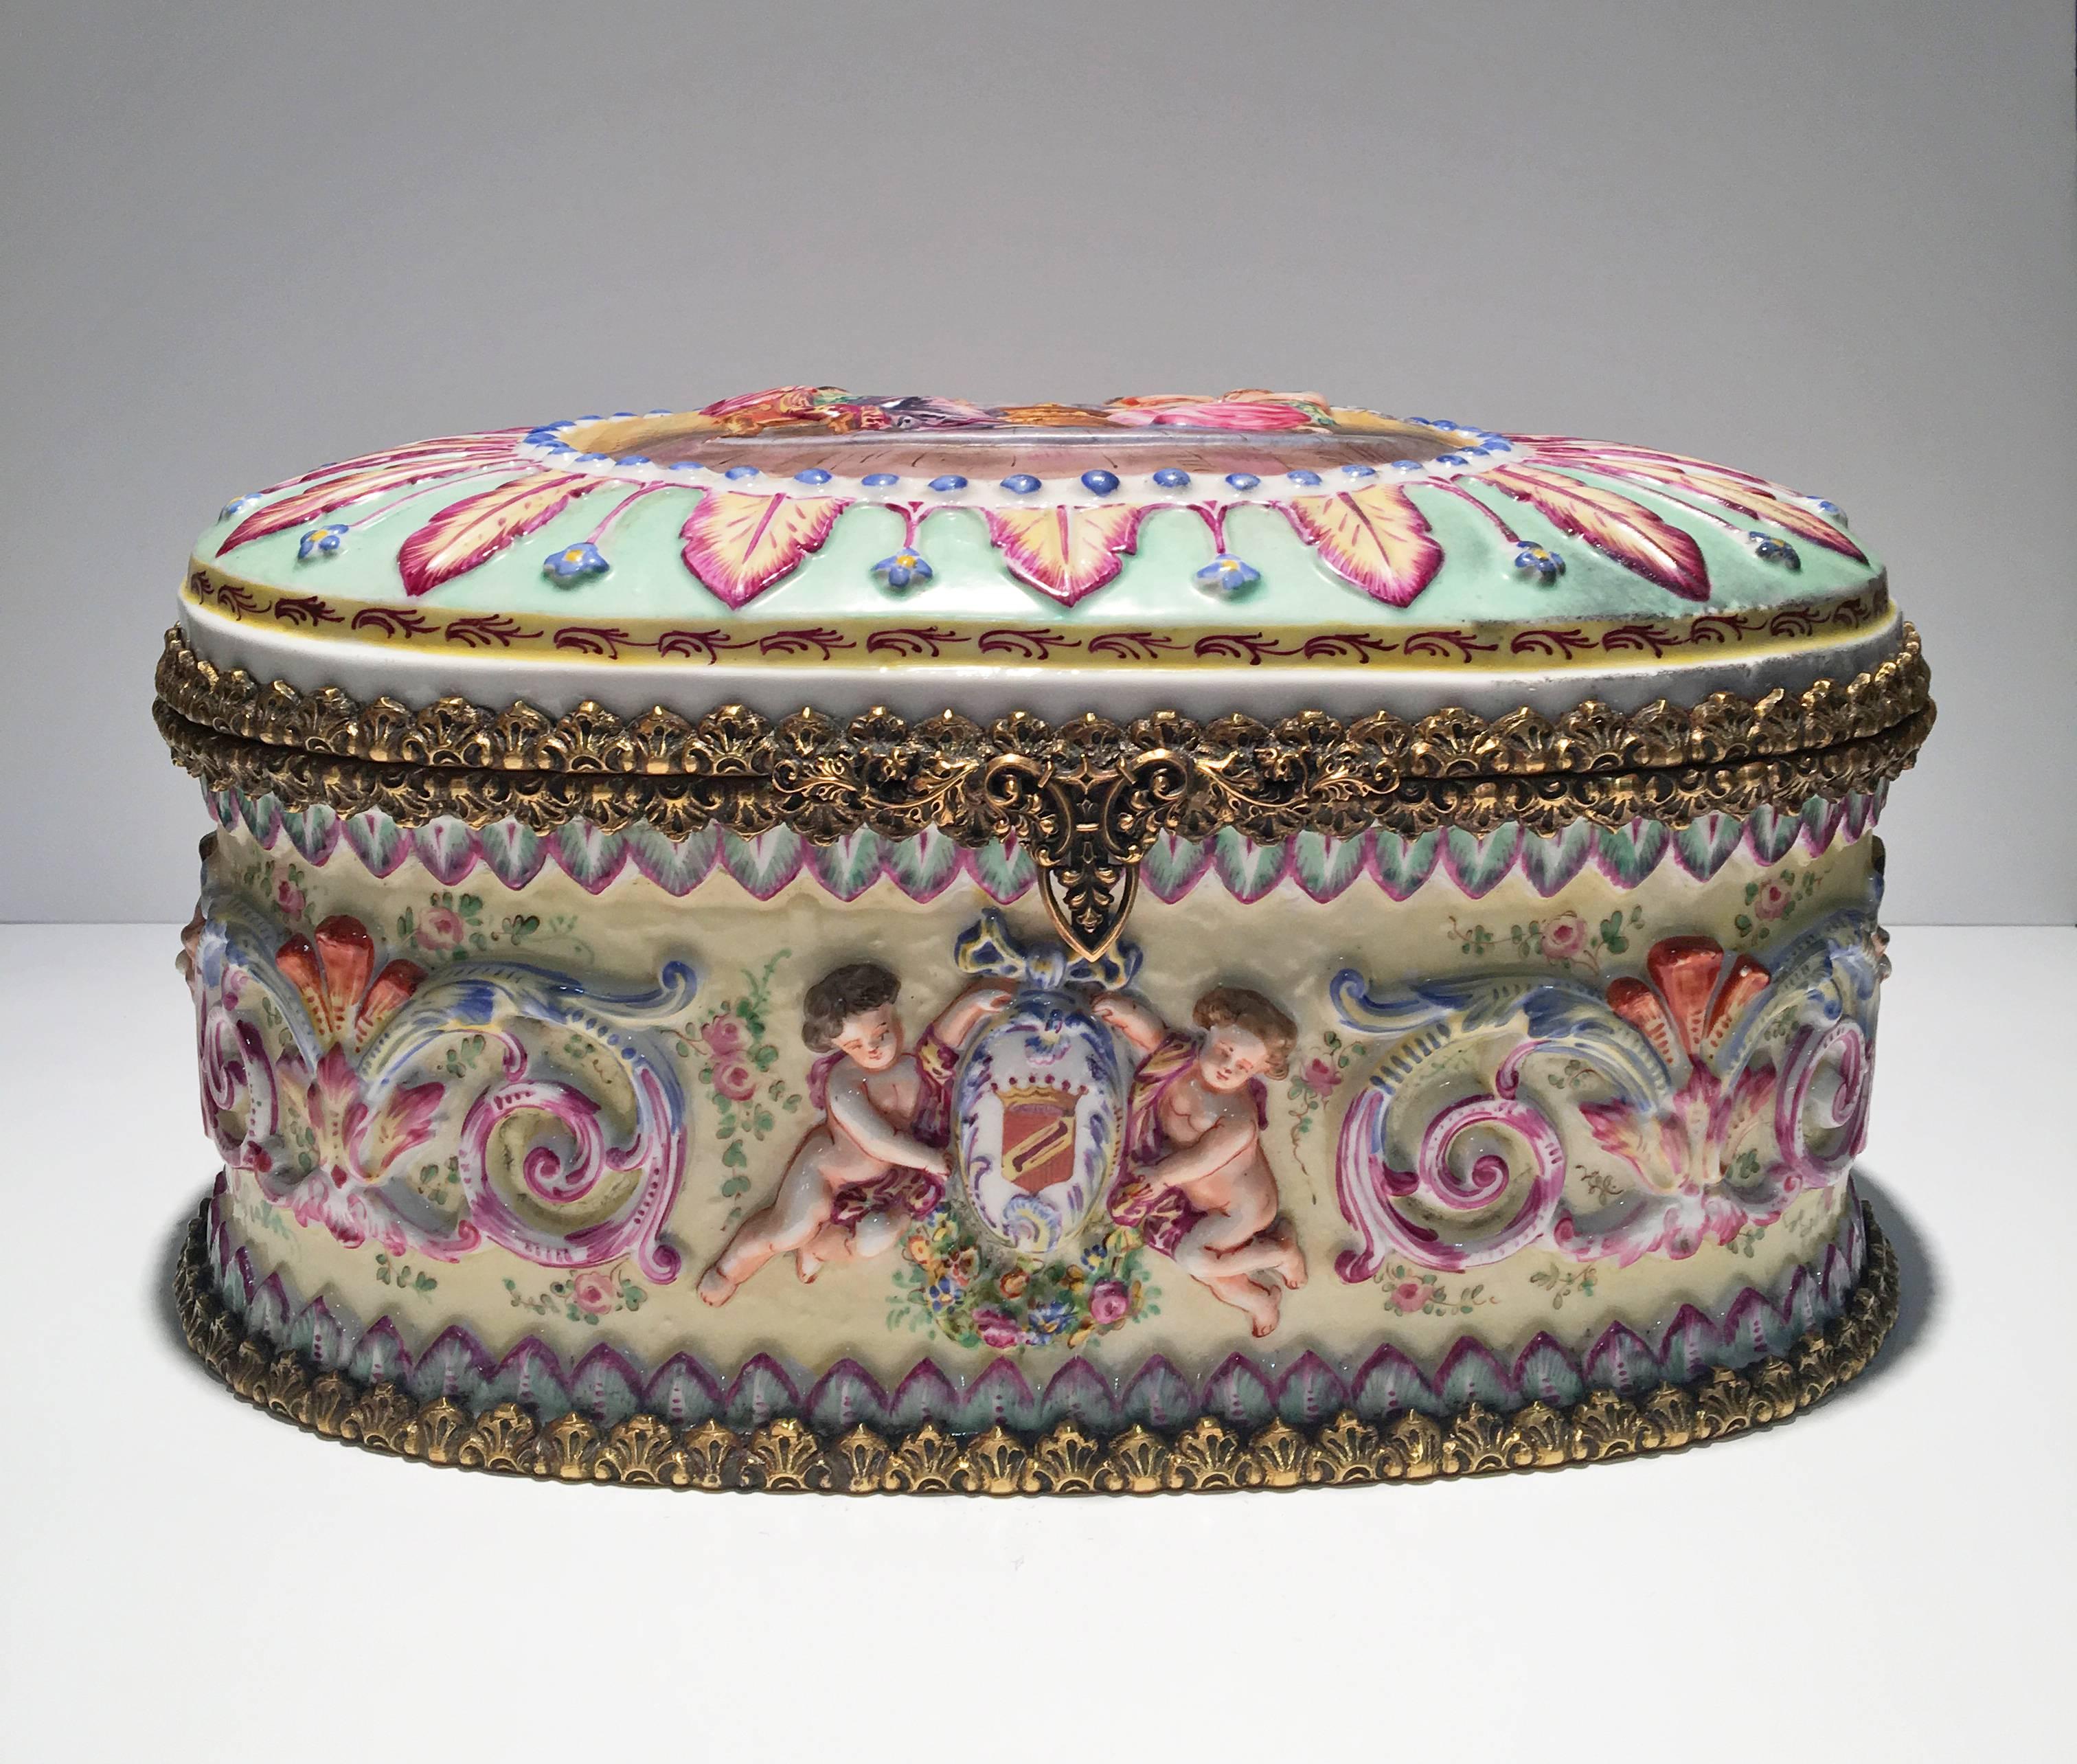 This beautiful 19th century Capo Di Monte hand painted porcelain box is decorated with colorful cherubs and the lid has scene of three women sitting around a fireplace. Distinctive 